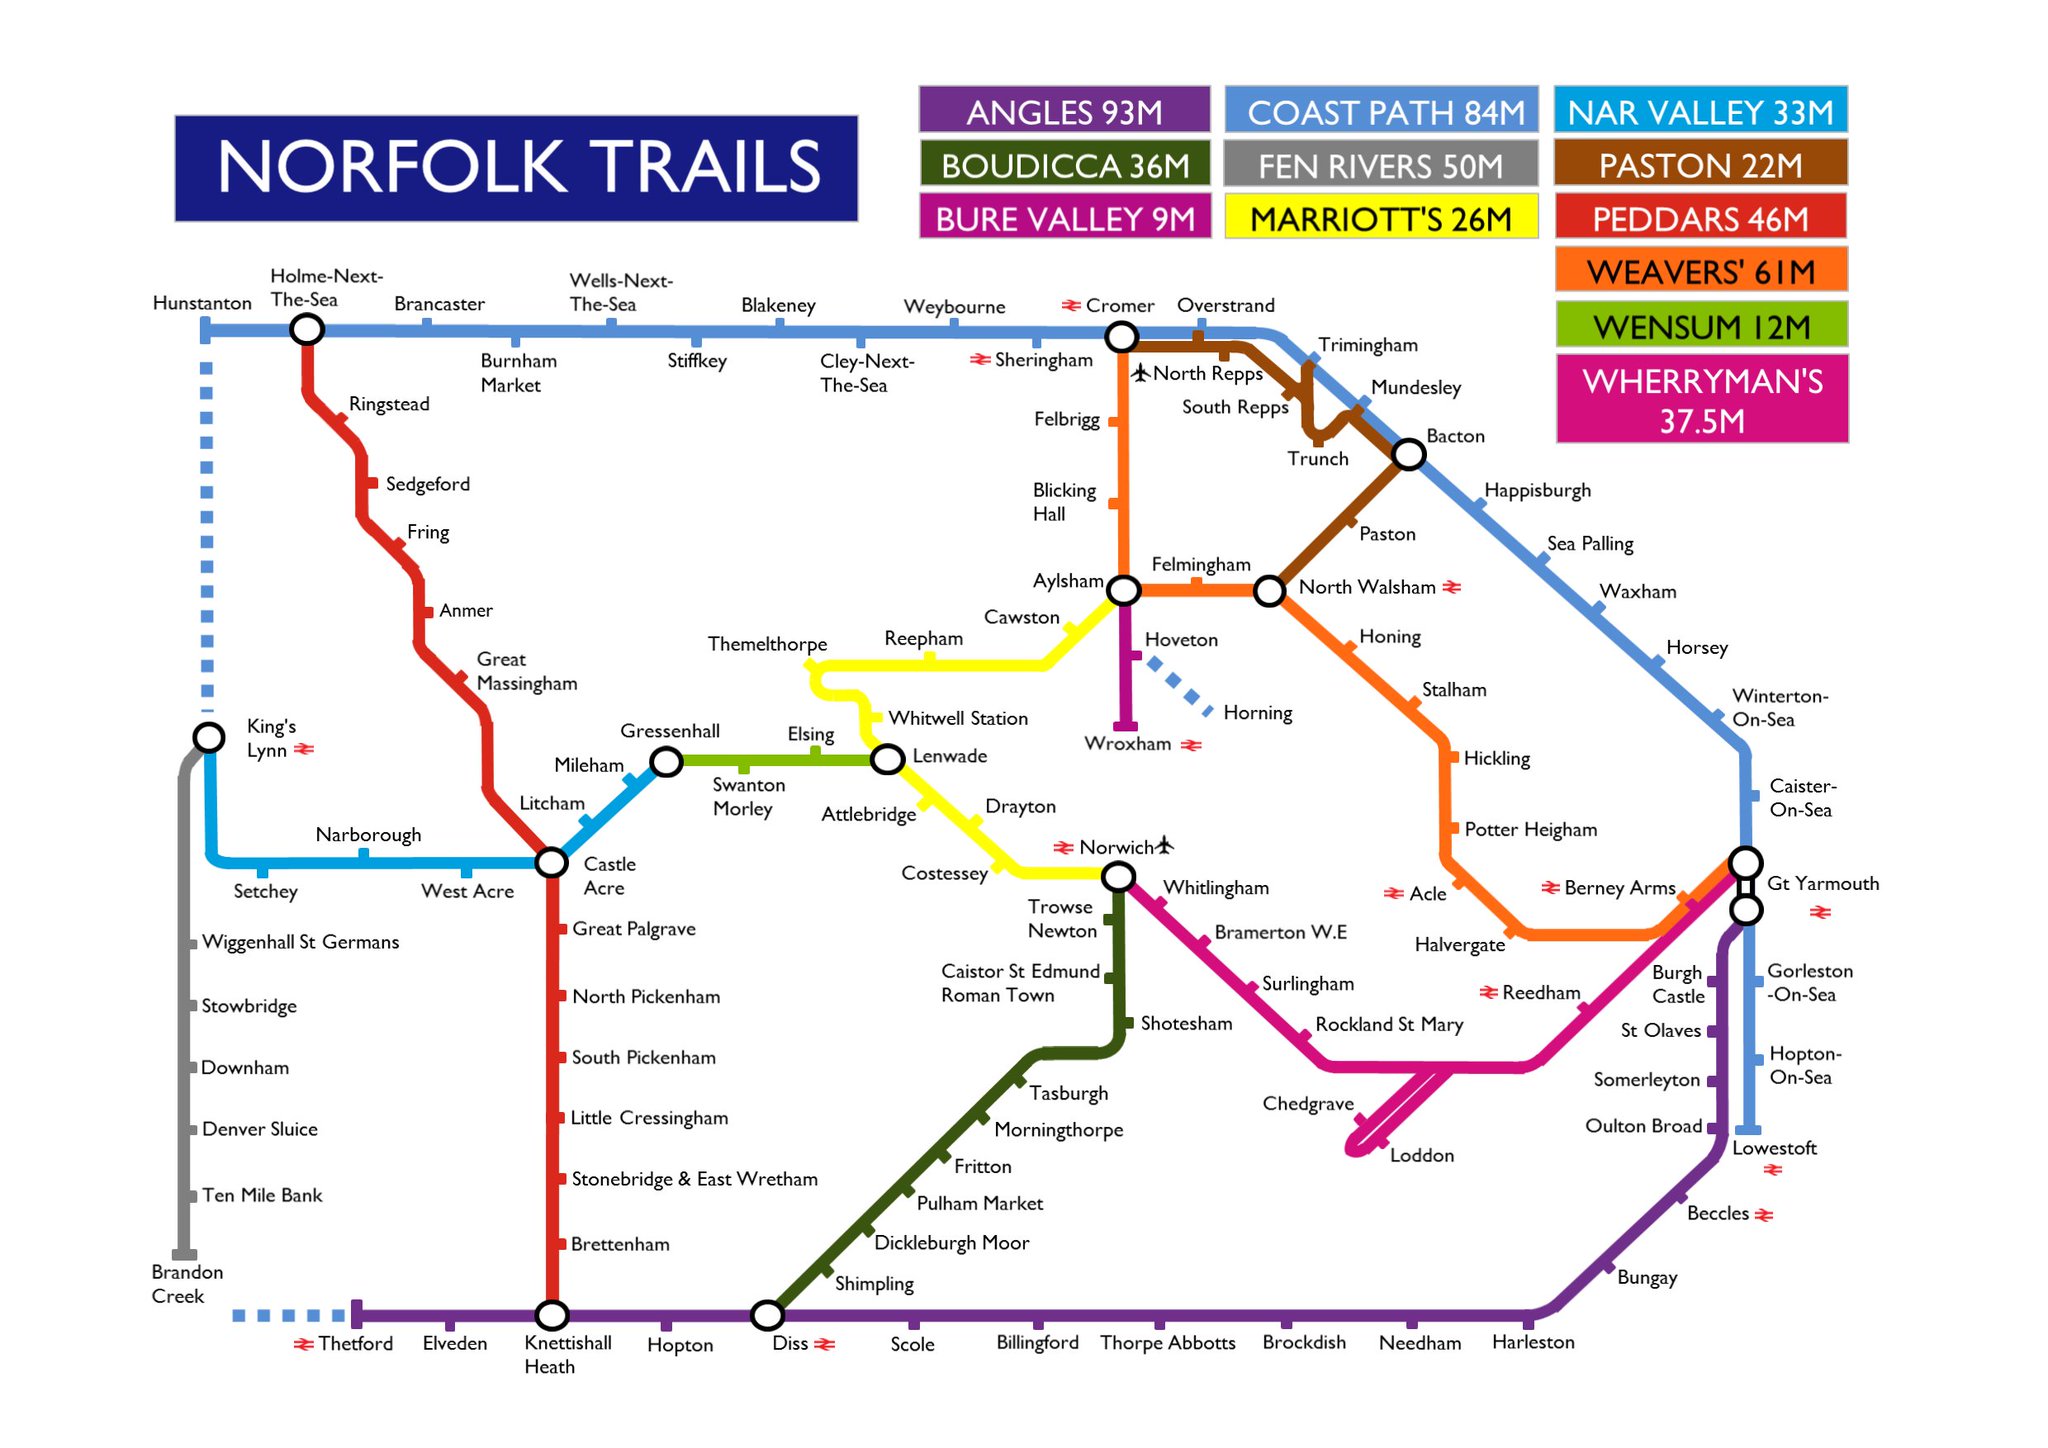 Norfolk County Council Norfolk Trails A Map Of Norfolk Trails Like You Ve Never Seen Before The Trails Network Reimagined In The Style Of An Underground Map Linking With The Railway